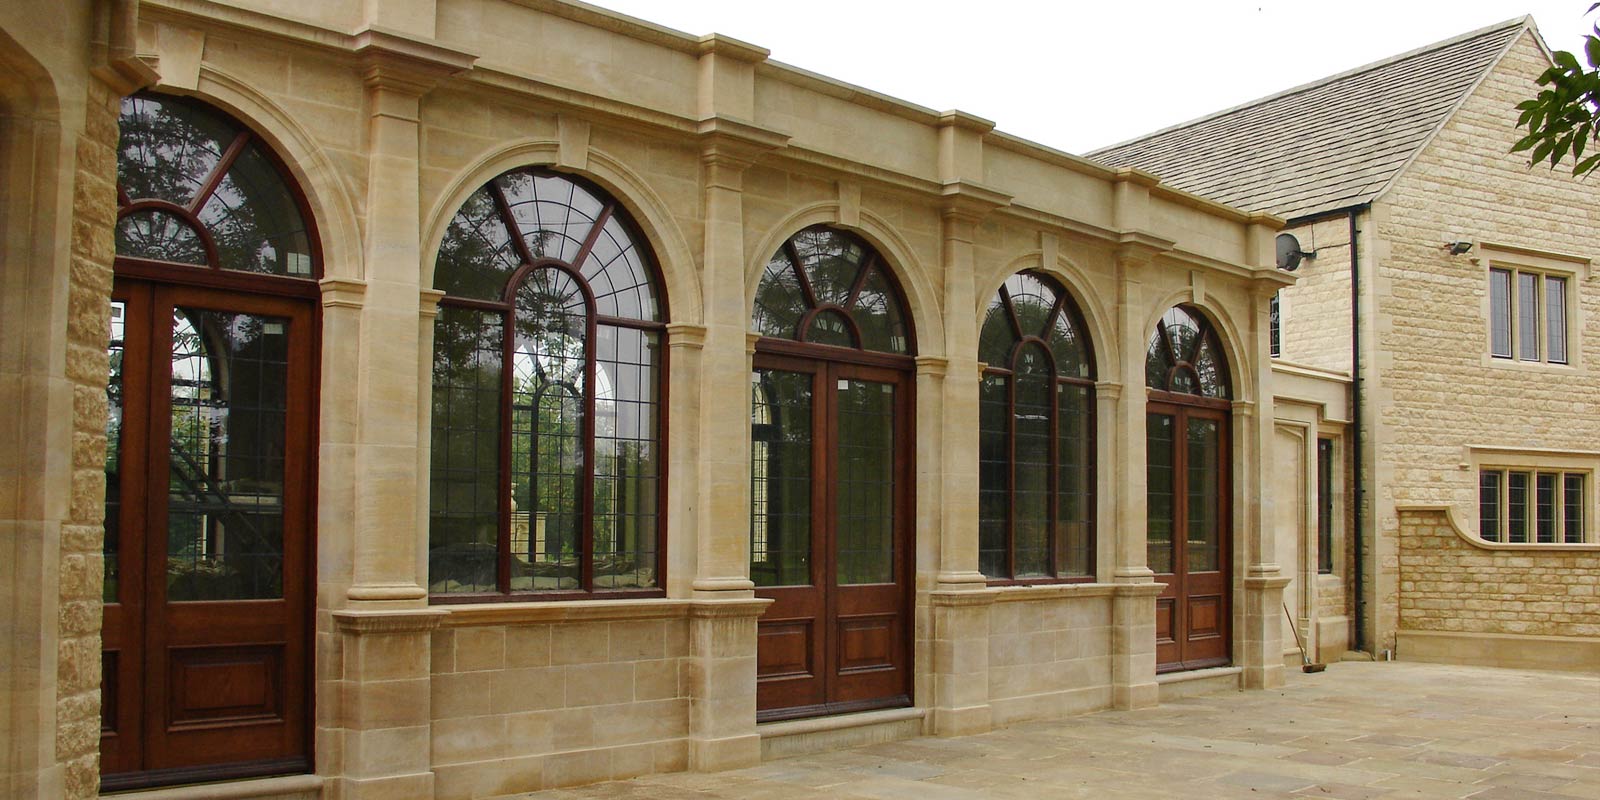 Specialist Stone Designs - High quality stonework and design services